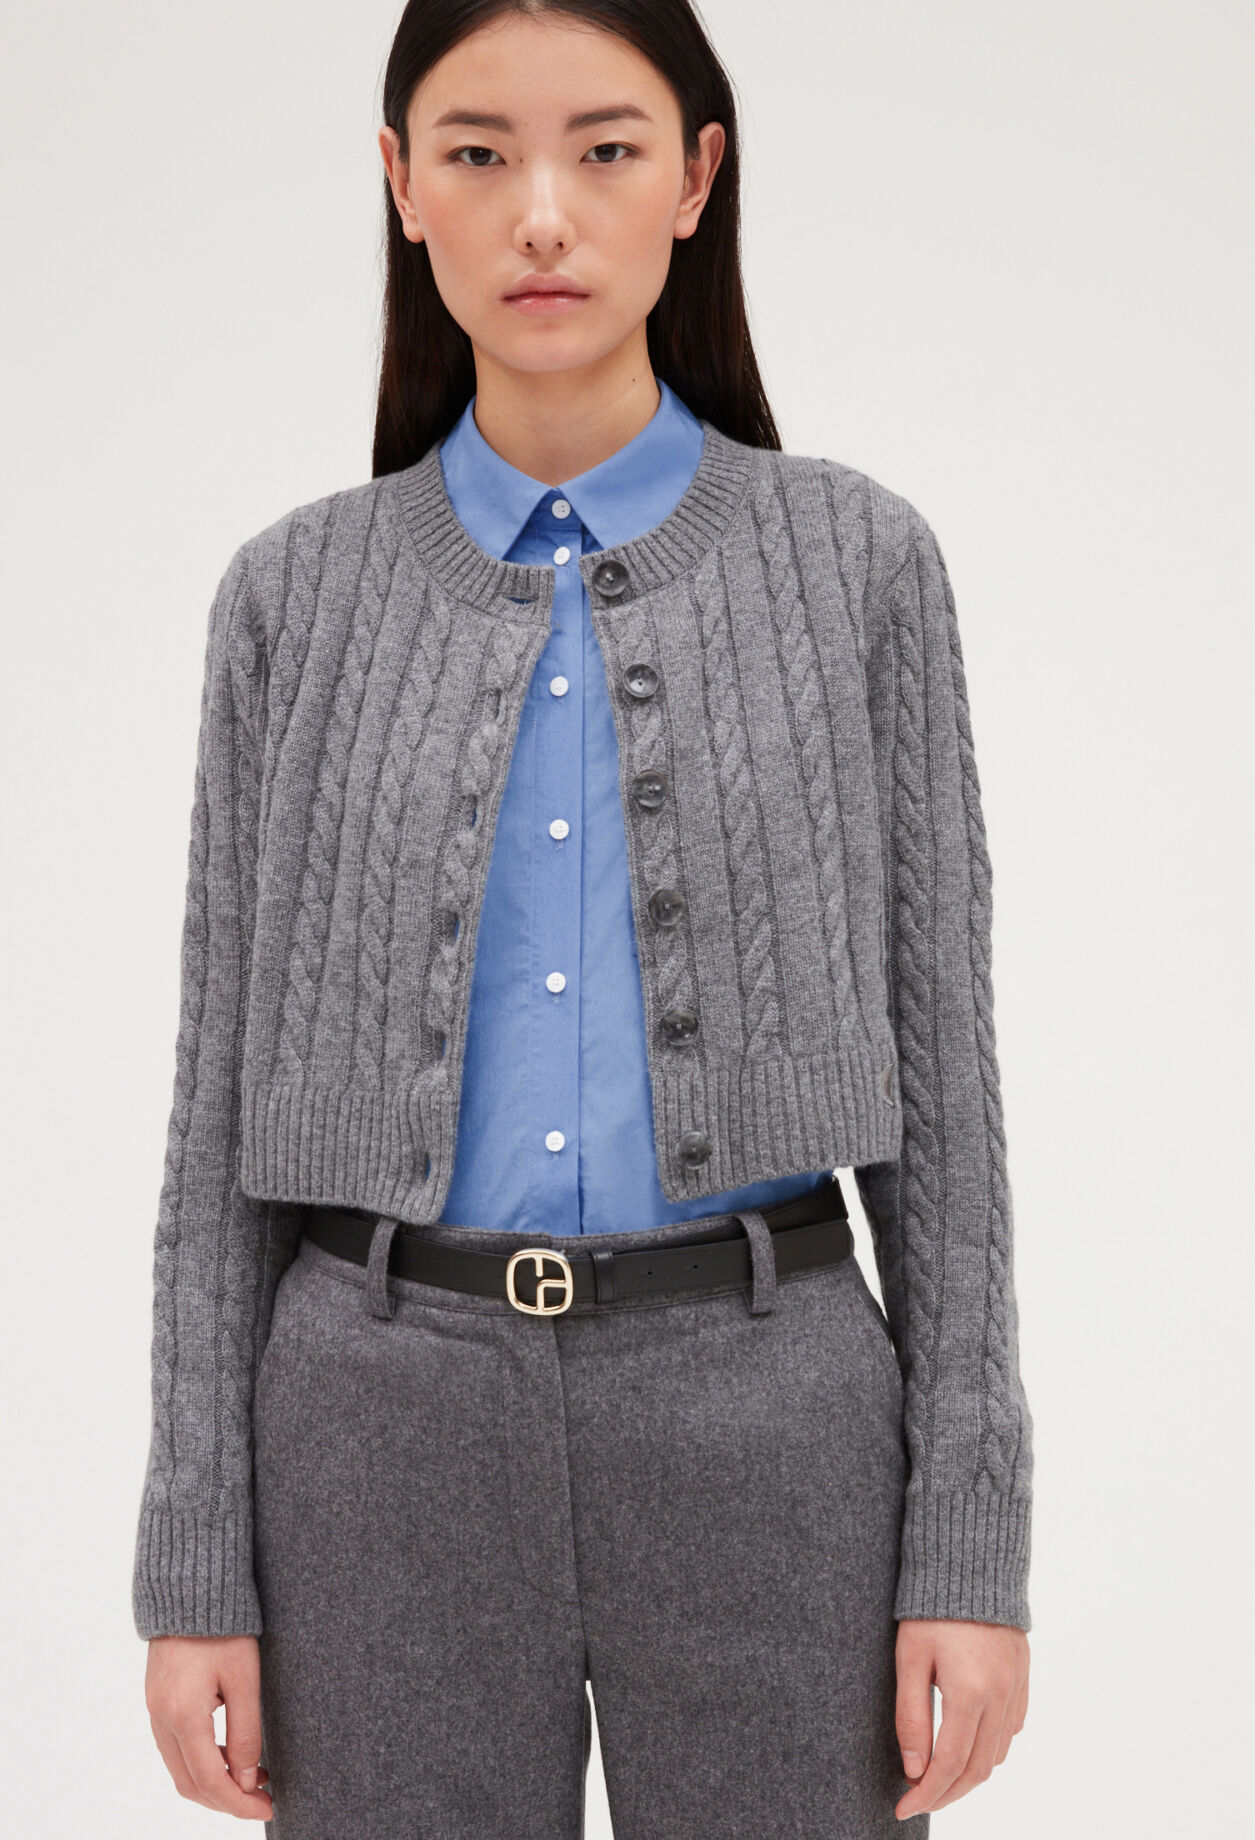 Mottled grey wool and cashmere cardigan